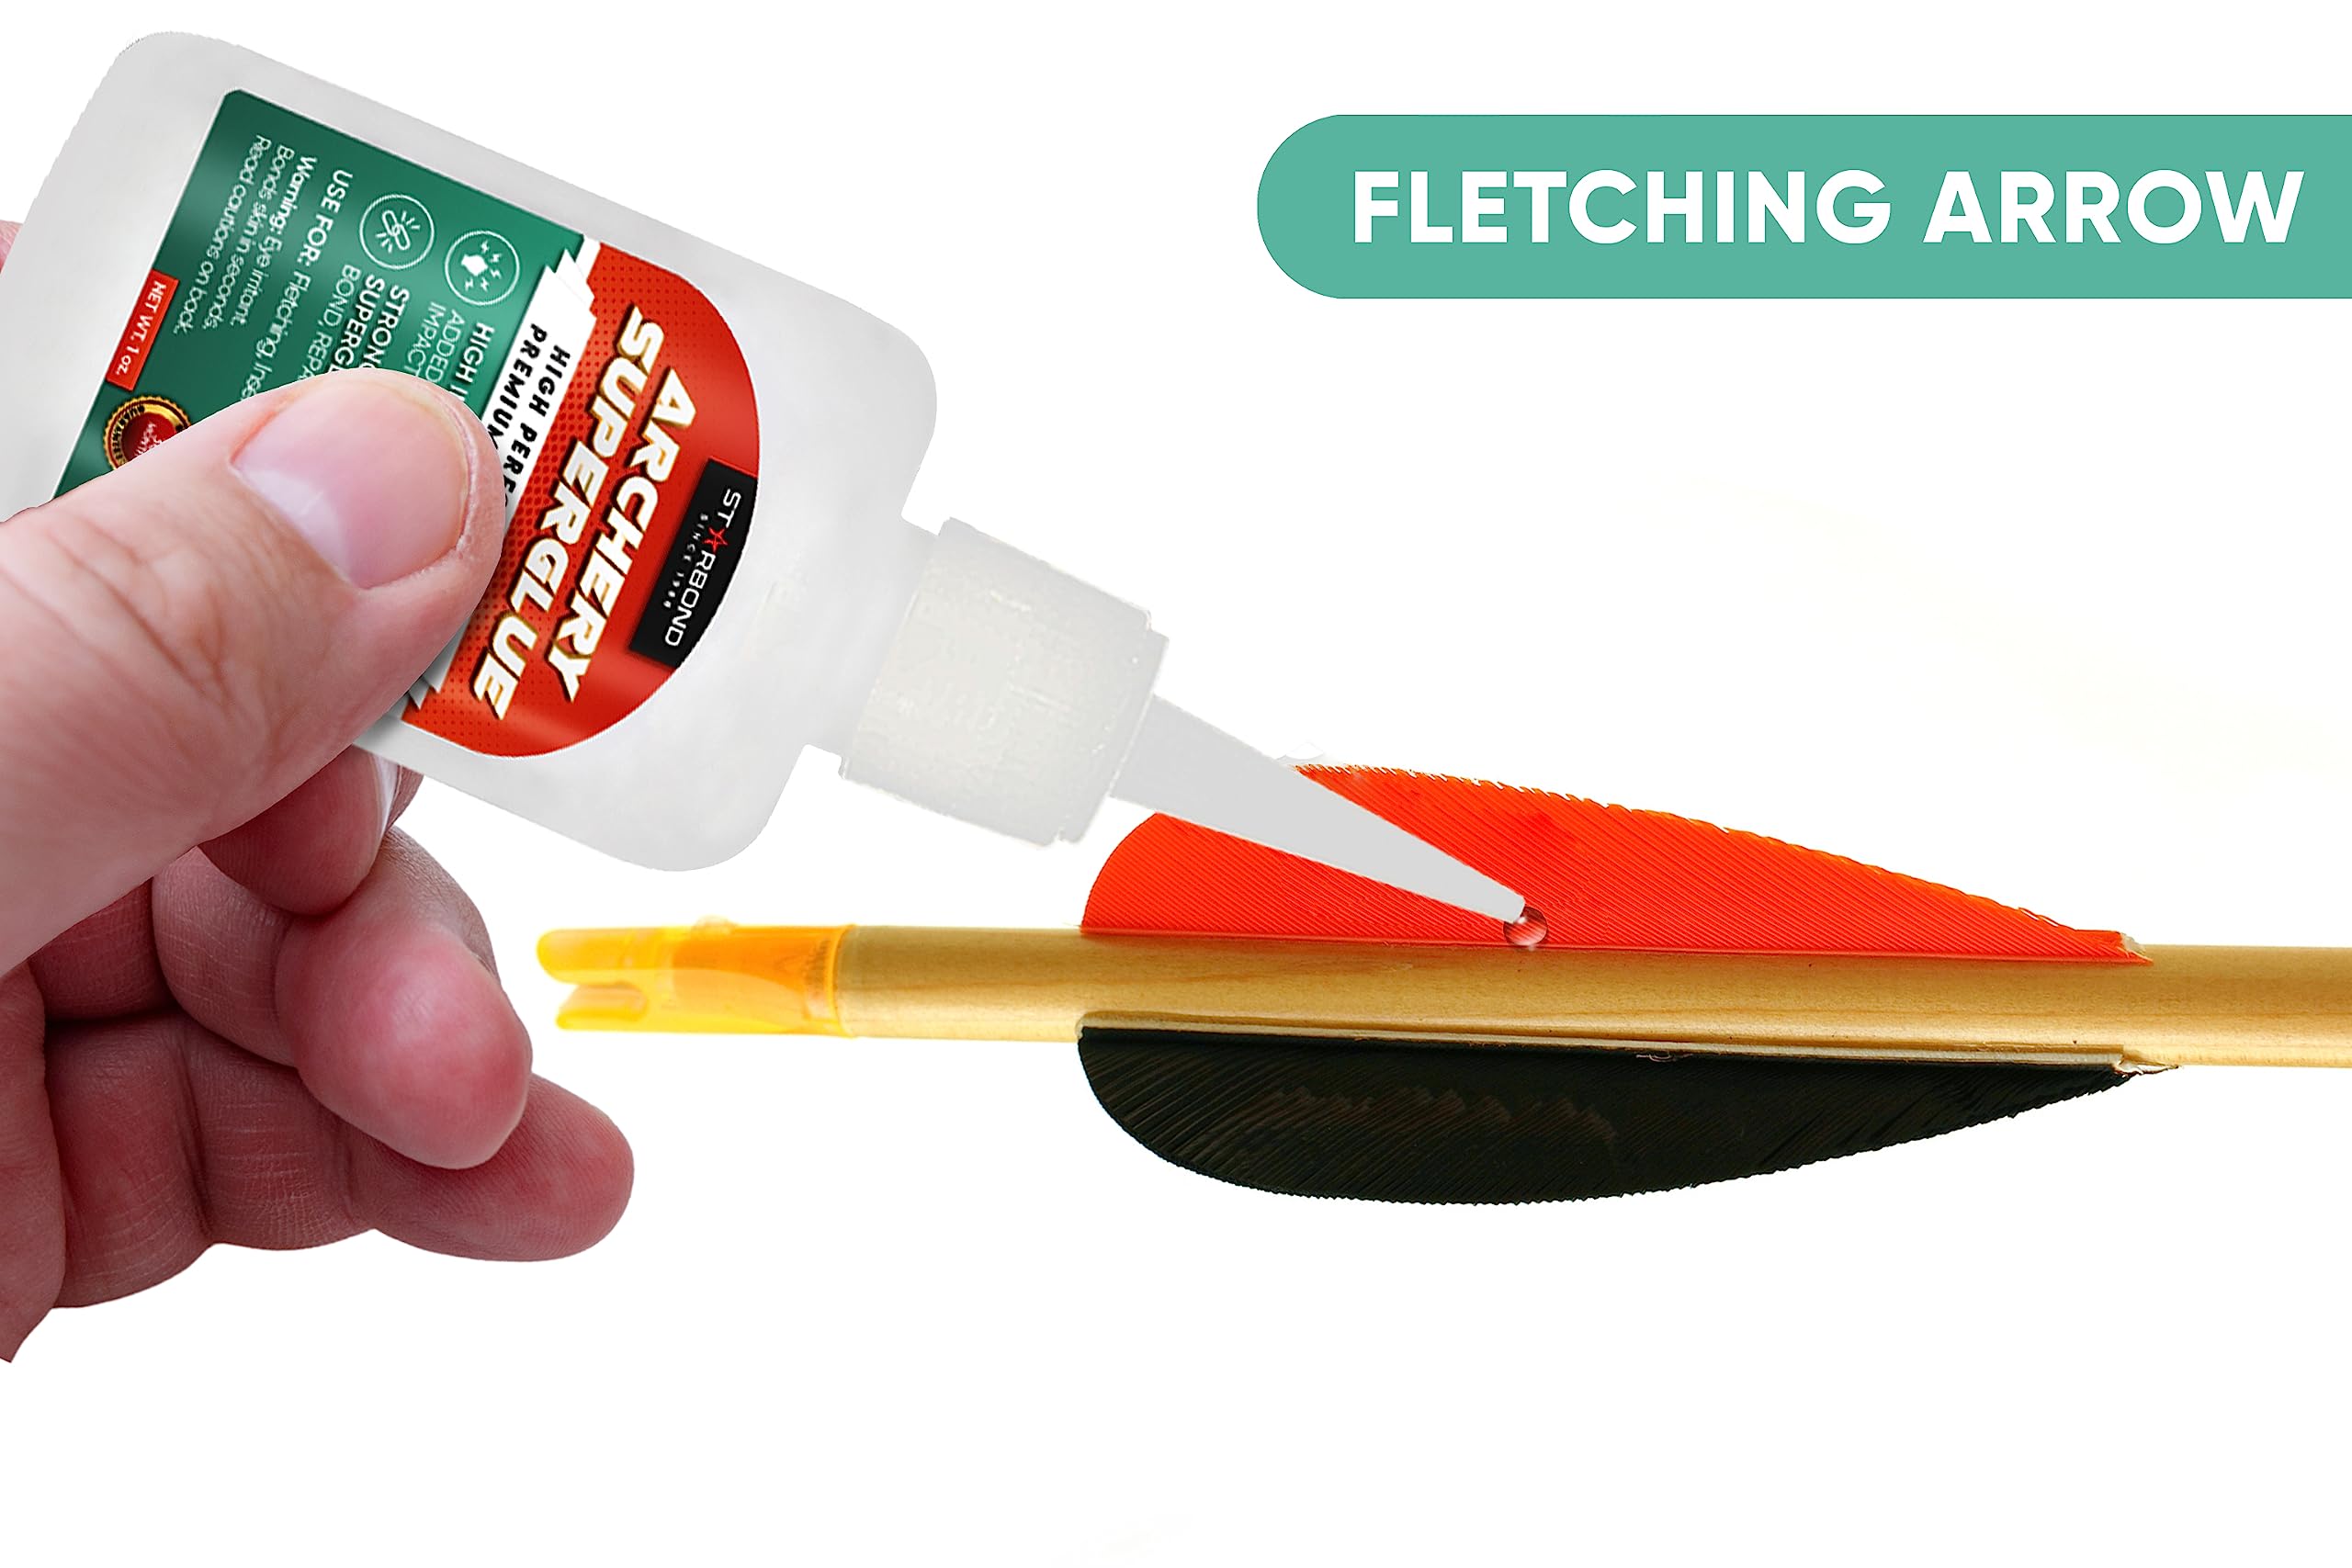 Starbond 1 oz. Premium Archery Fletching Super Glue (Less Brittle, High Impact Resistance), Includes Instant-Dry Activator for Archery Fletching, Arrow Inserts, and Precision Repairs